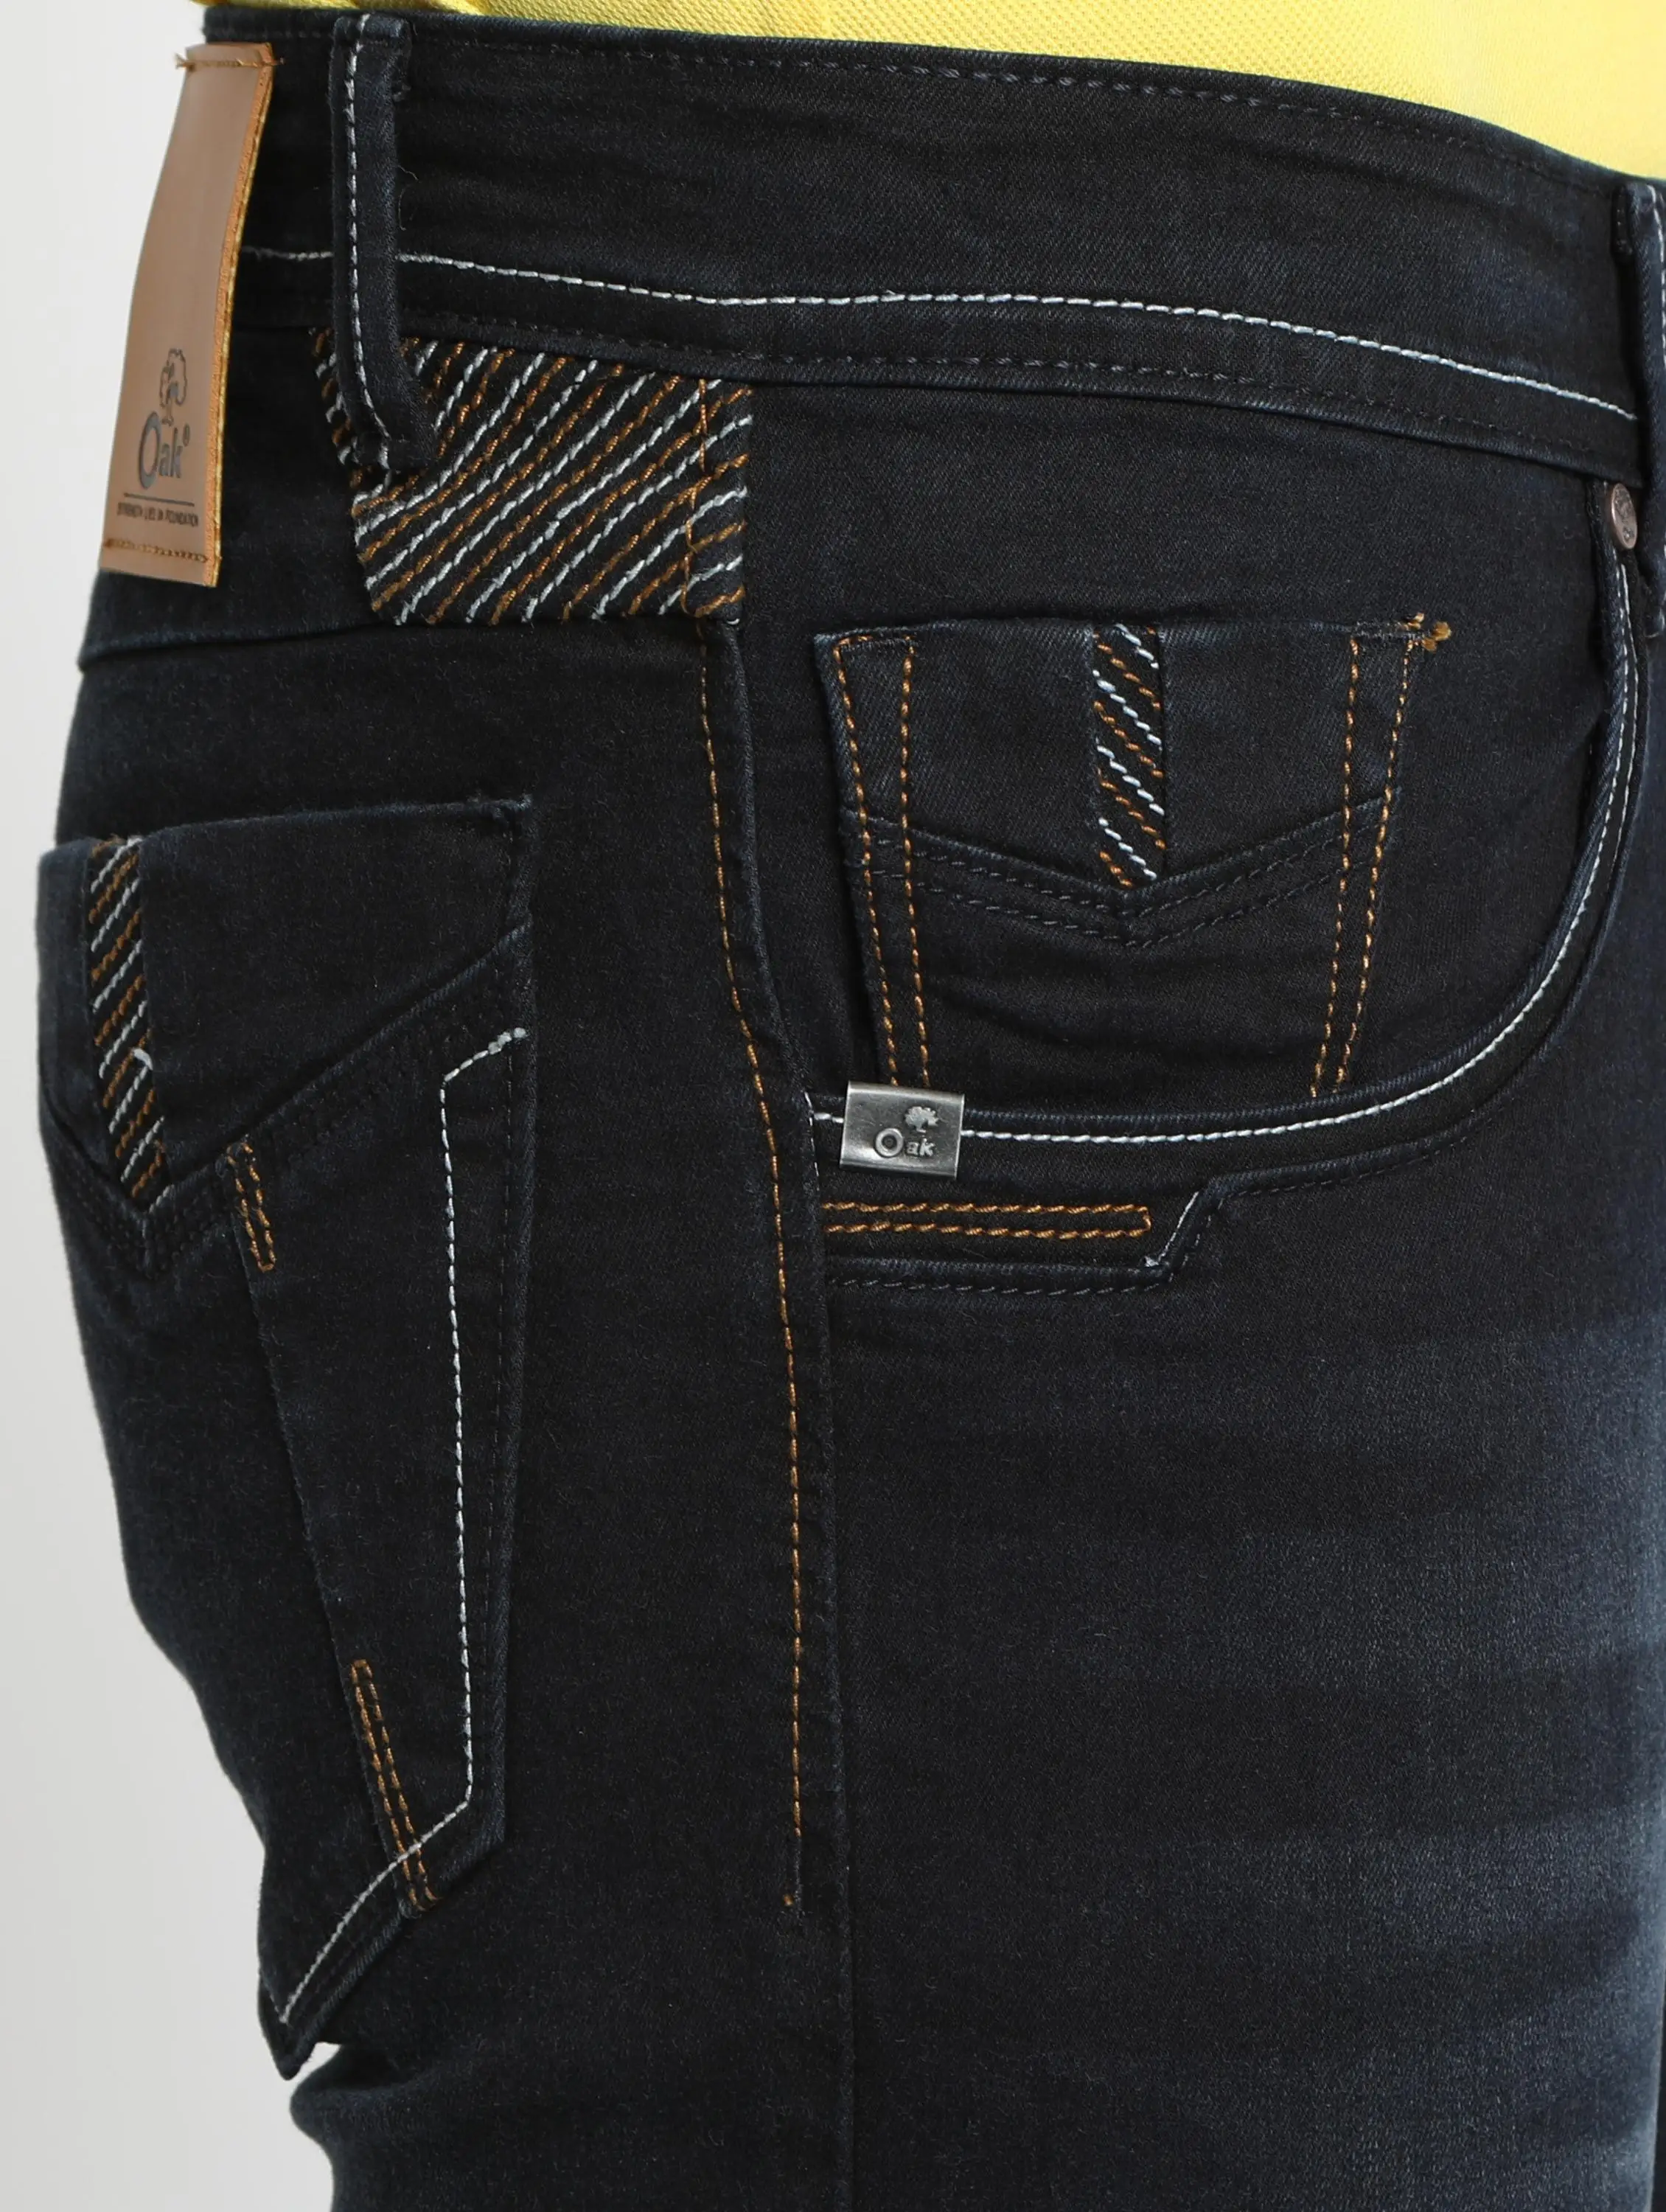 citizens harlow jeans